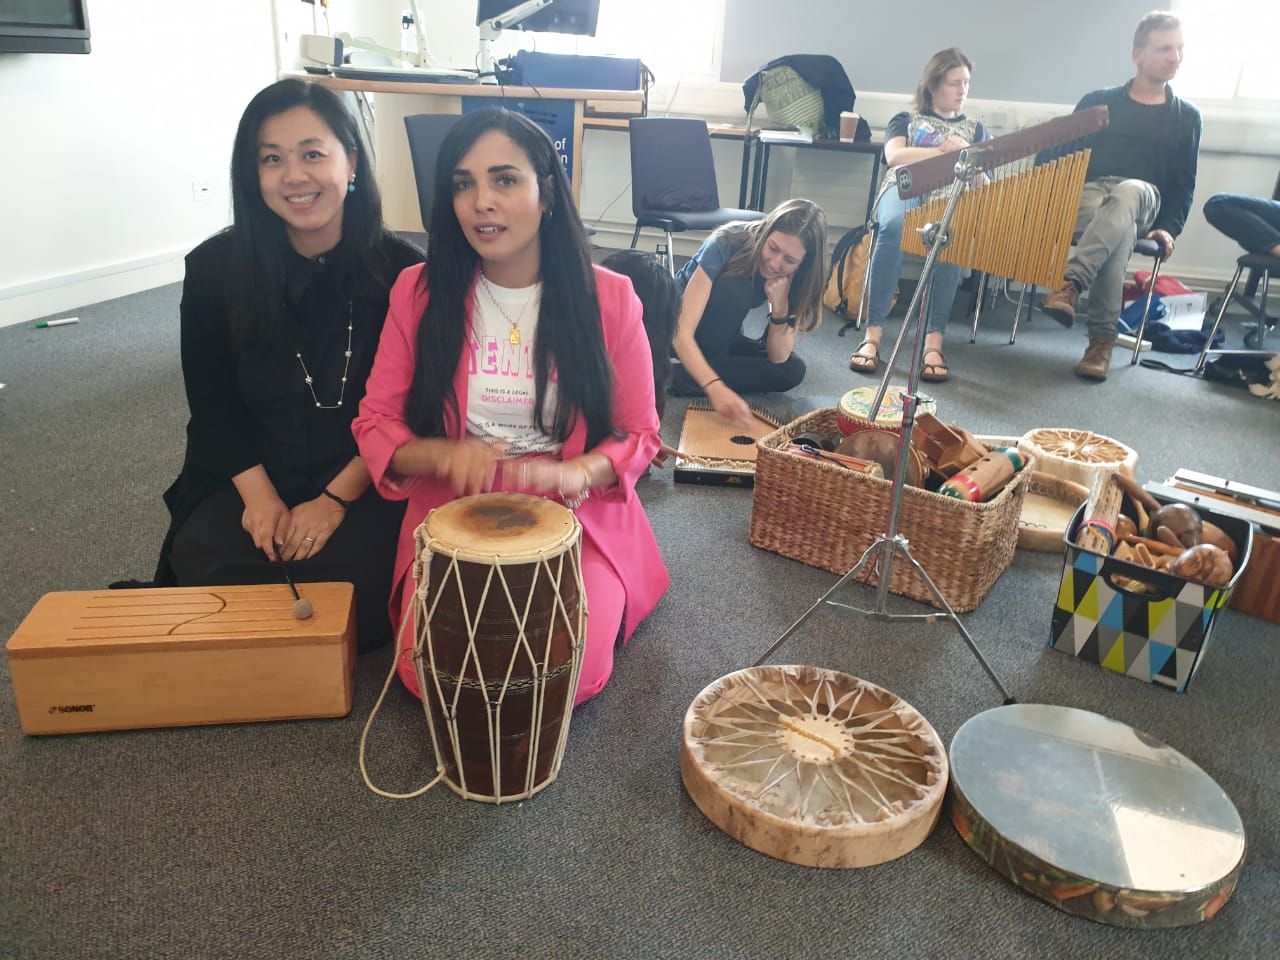 Ghada Abdel Rahim represents Egypt with a music therapy course at Britain’s largest university